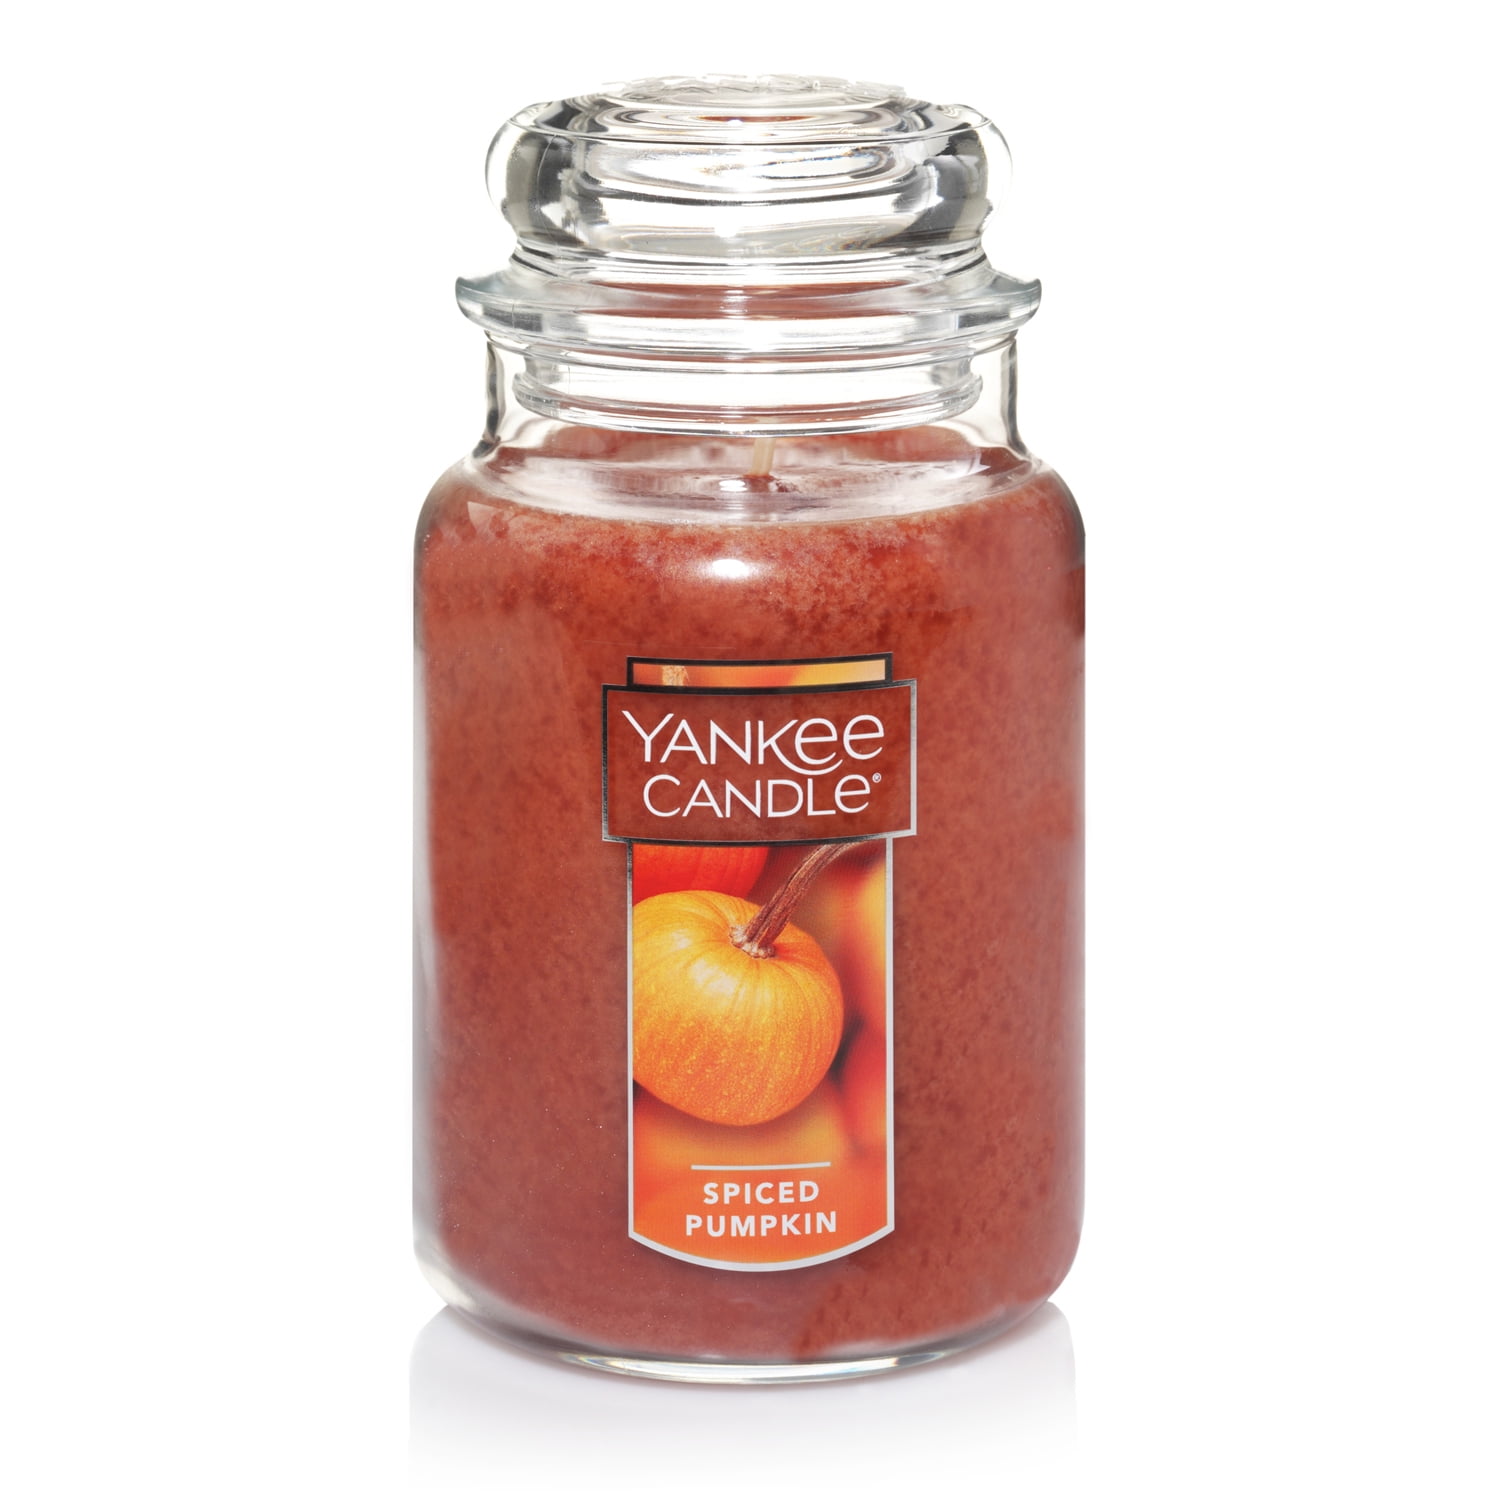 LOT OF 3 PACKAGES NEW YANKEE CANDLE SPICED PUMPKIN WAX MELTS 2.6 OZ 